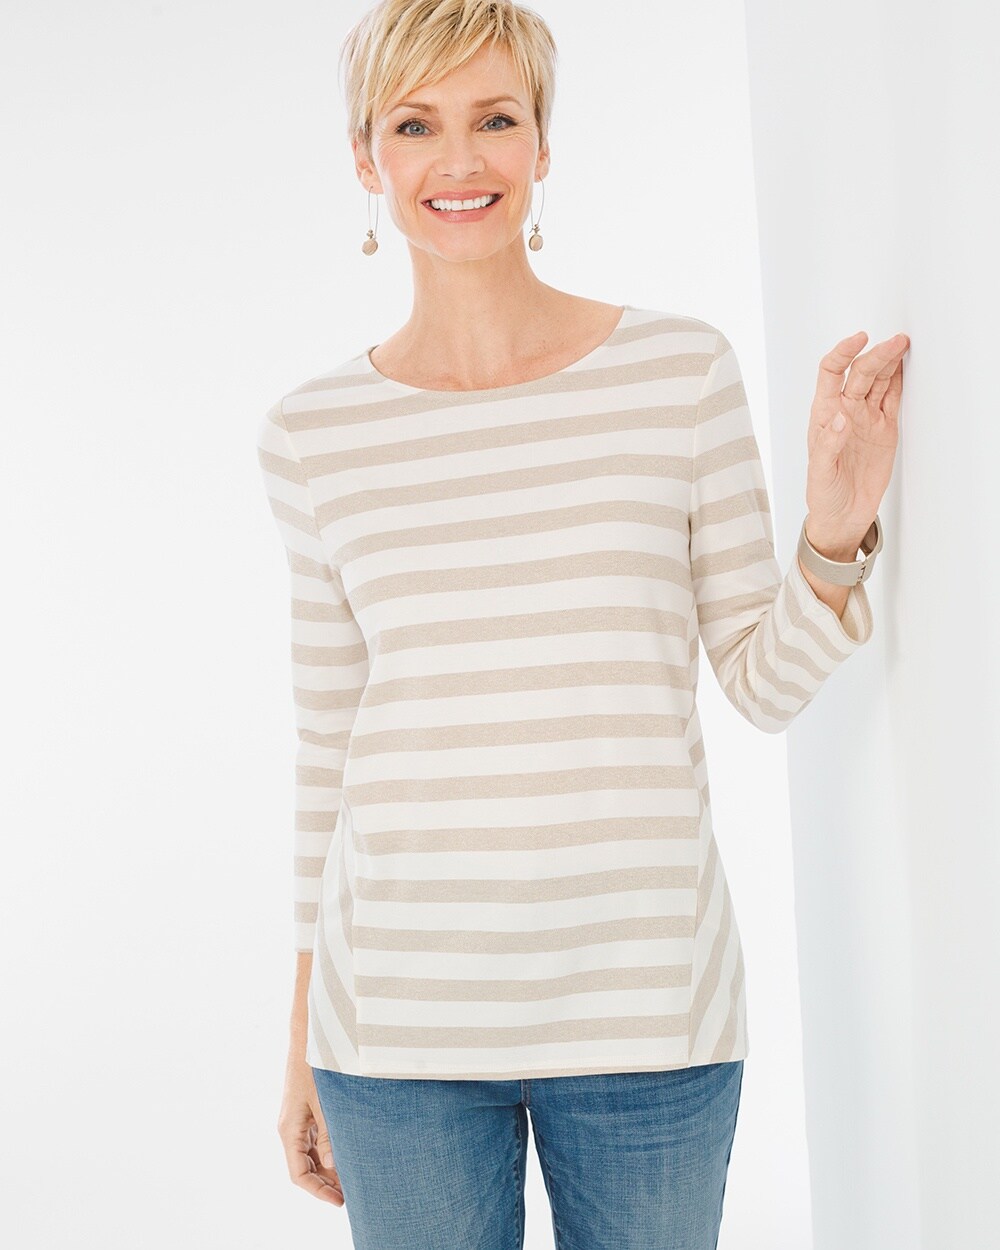 Shimmer Striped Tee